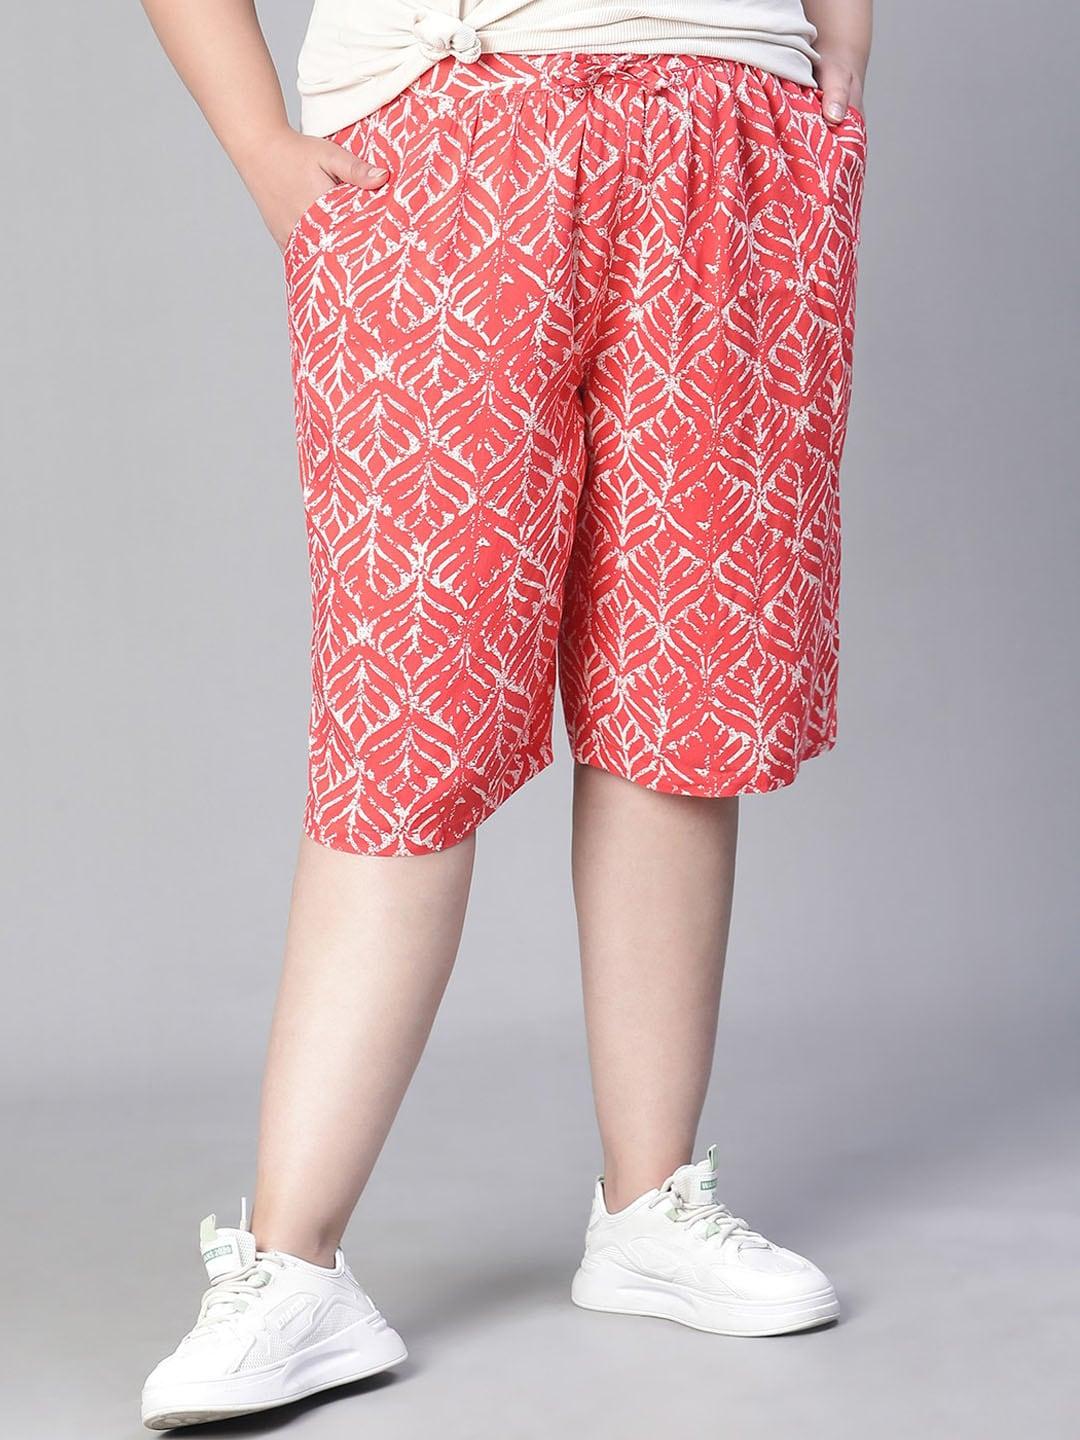 Oxolloxo Women Floral Printed High-Rise Shorts